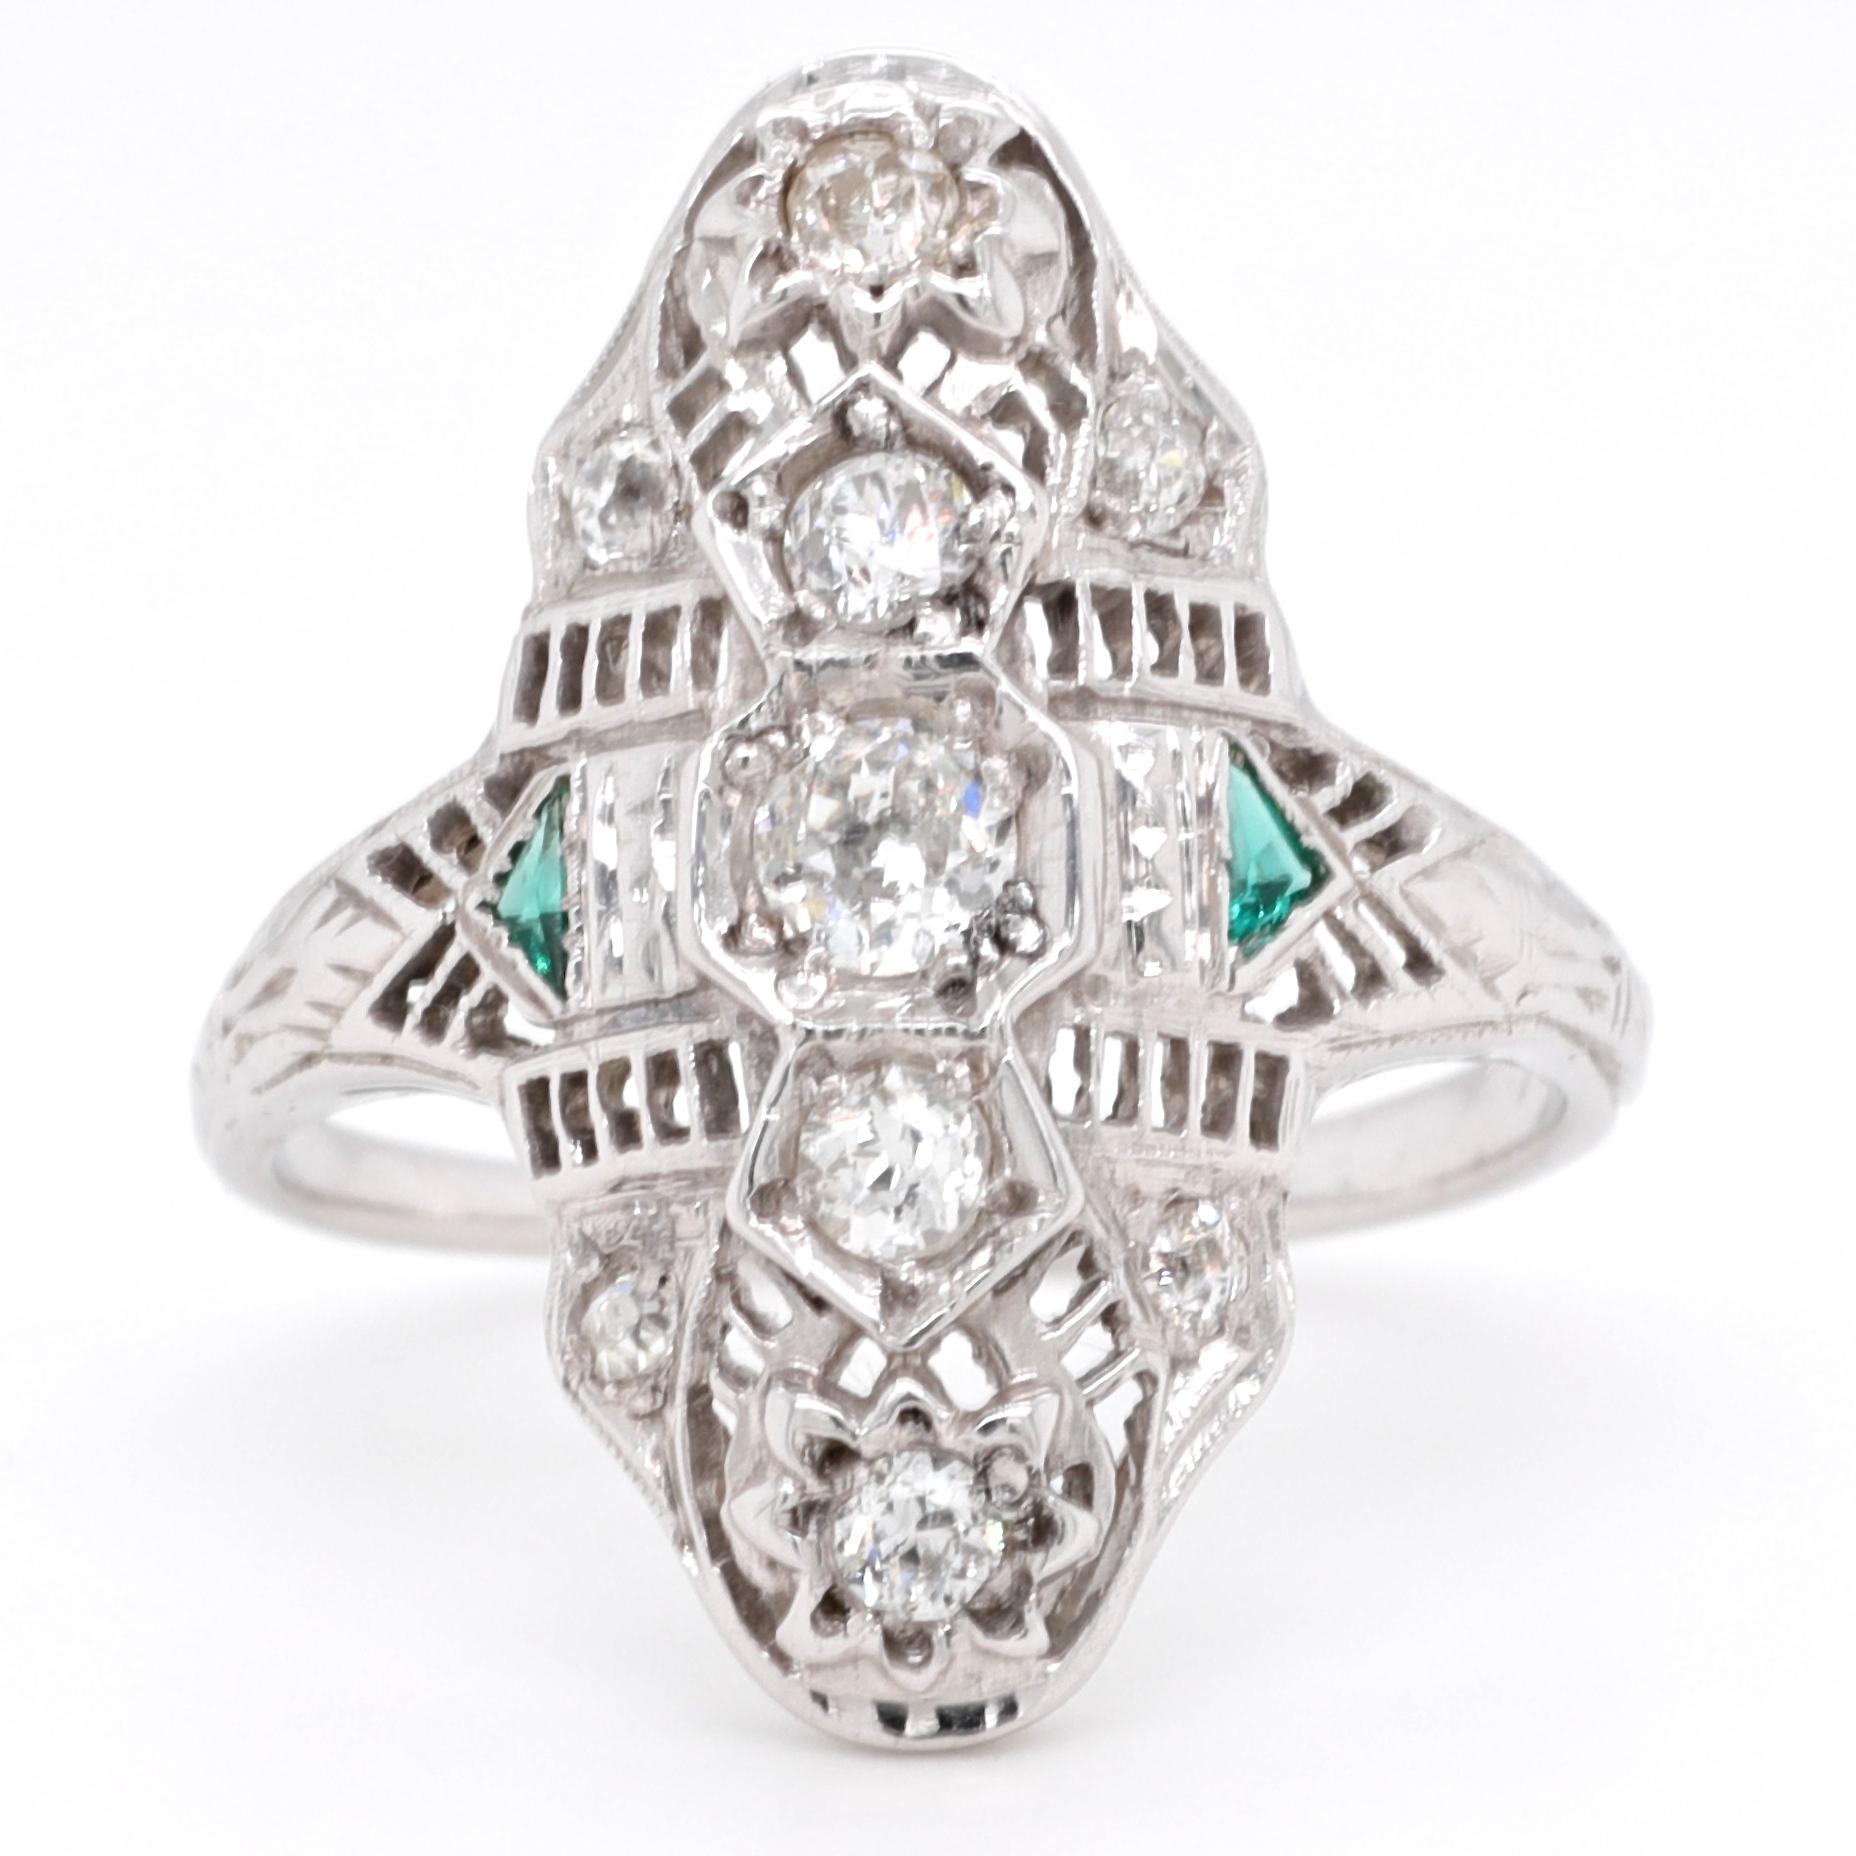 Would you like to own something that is the symbol of an era? And how good would it feel to wear it? This ring is the epitome of Art Deco; symmetry, triangle emeralds, filigree, old European cut diamonds, all of the characteristic of a true period